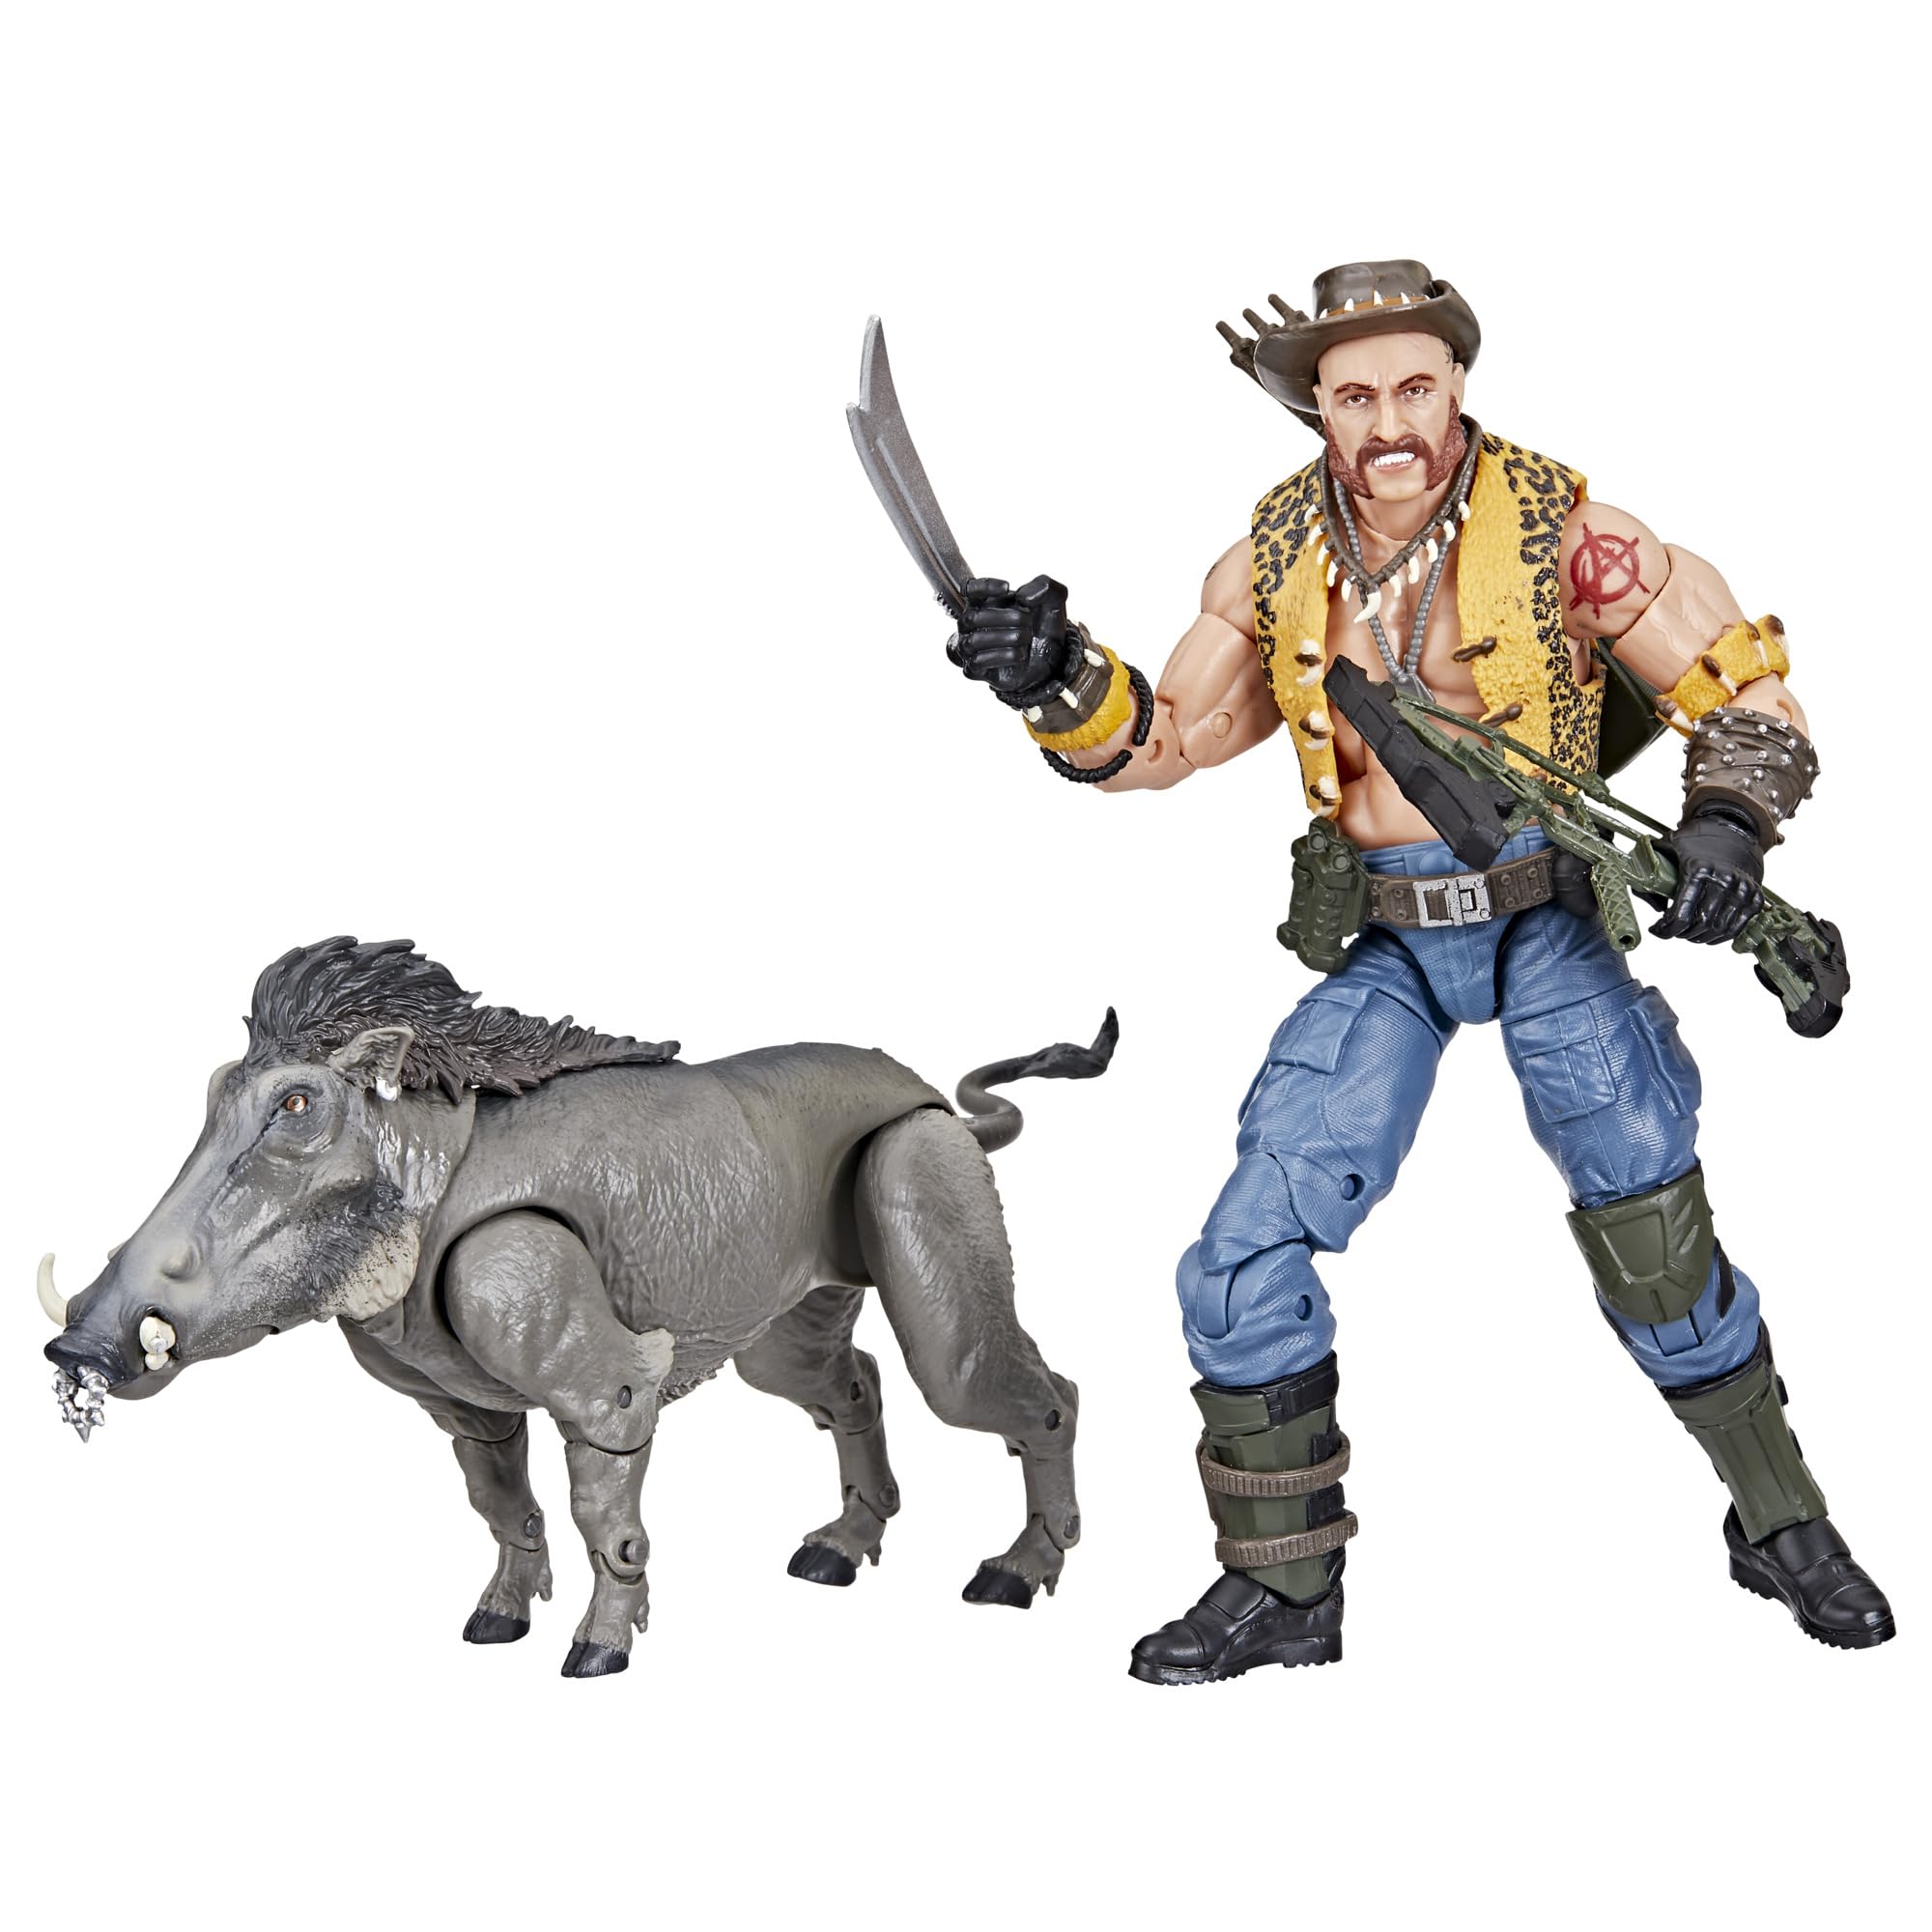 G.I. Joe Classified Series #125, Dreadnok Gnawgahyde and Pets Porkbelly & Yobbo, Collectible 6-Inch Action Figure with 16 Accessories